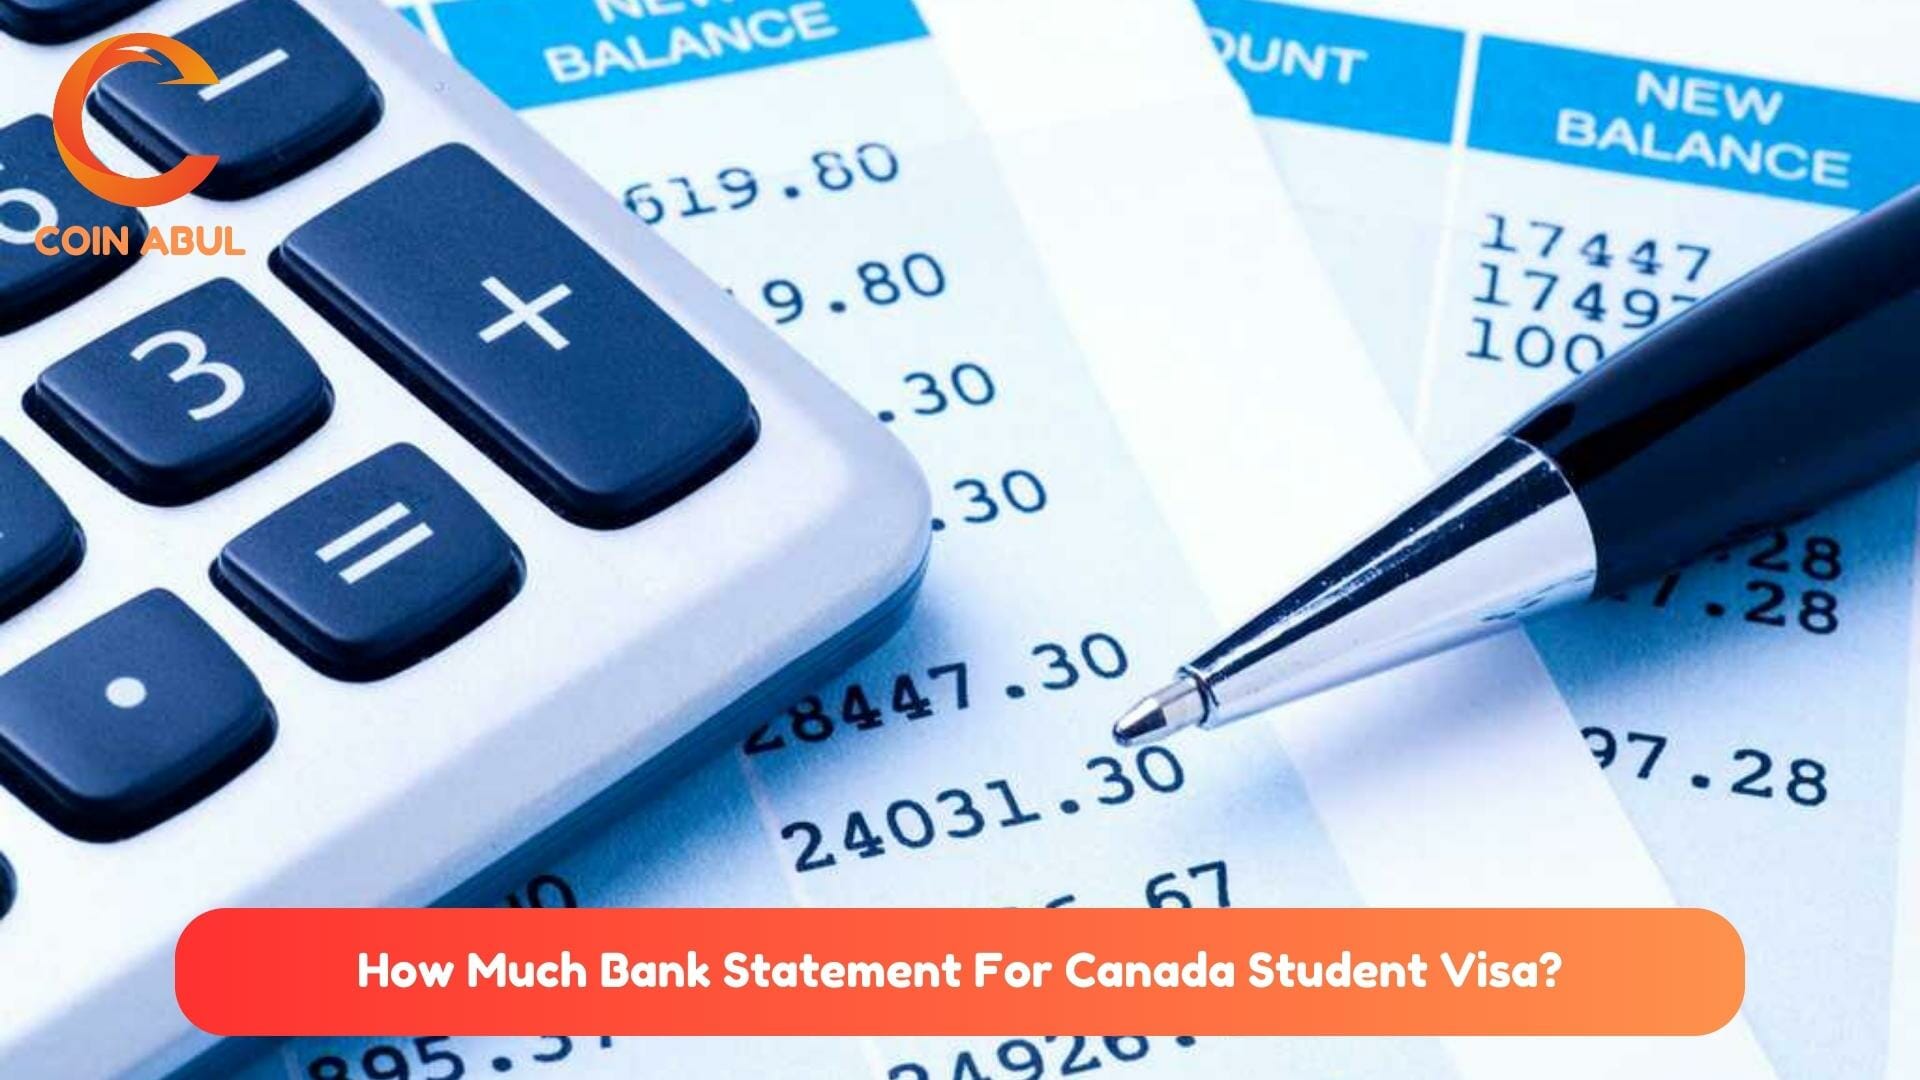 How Much Bank Statement For Canada Student Visa